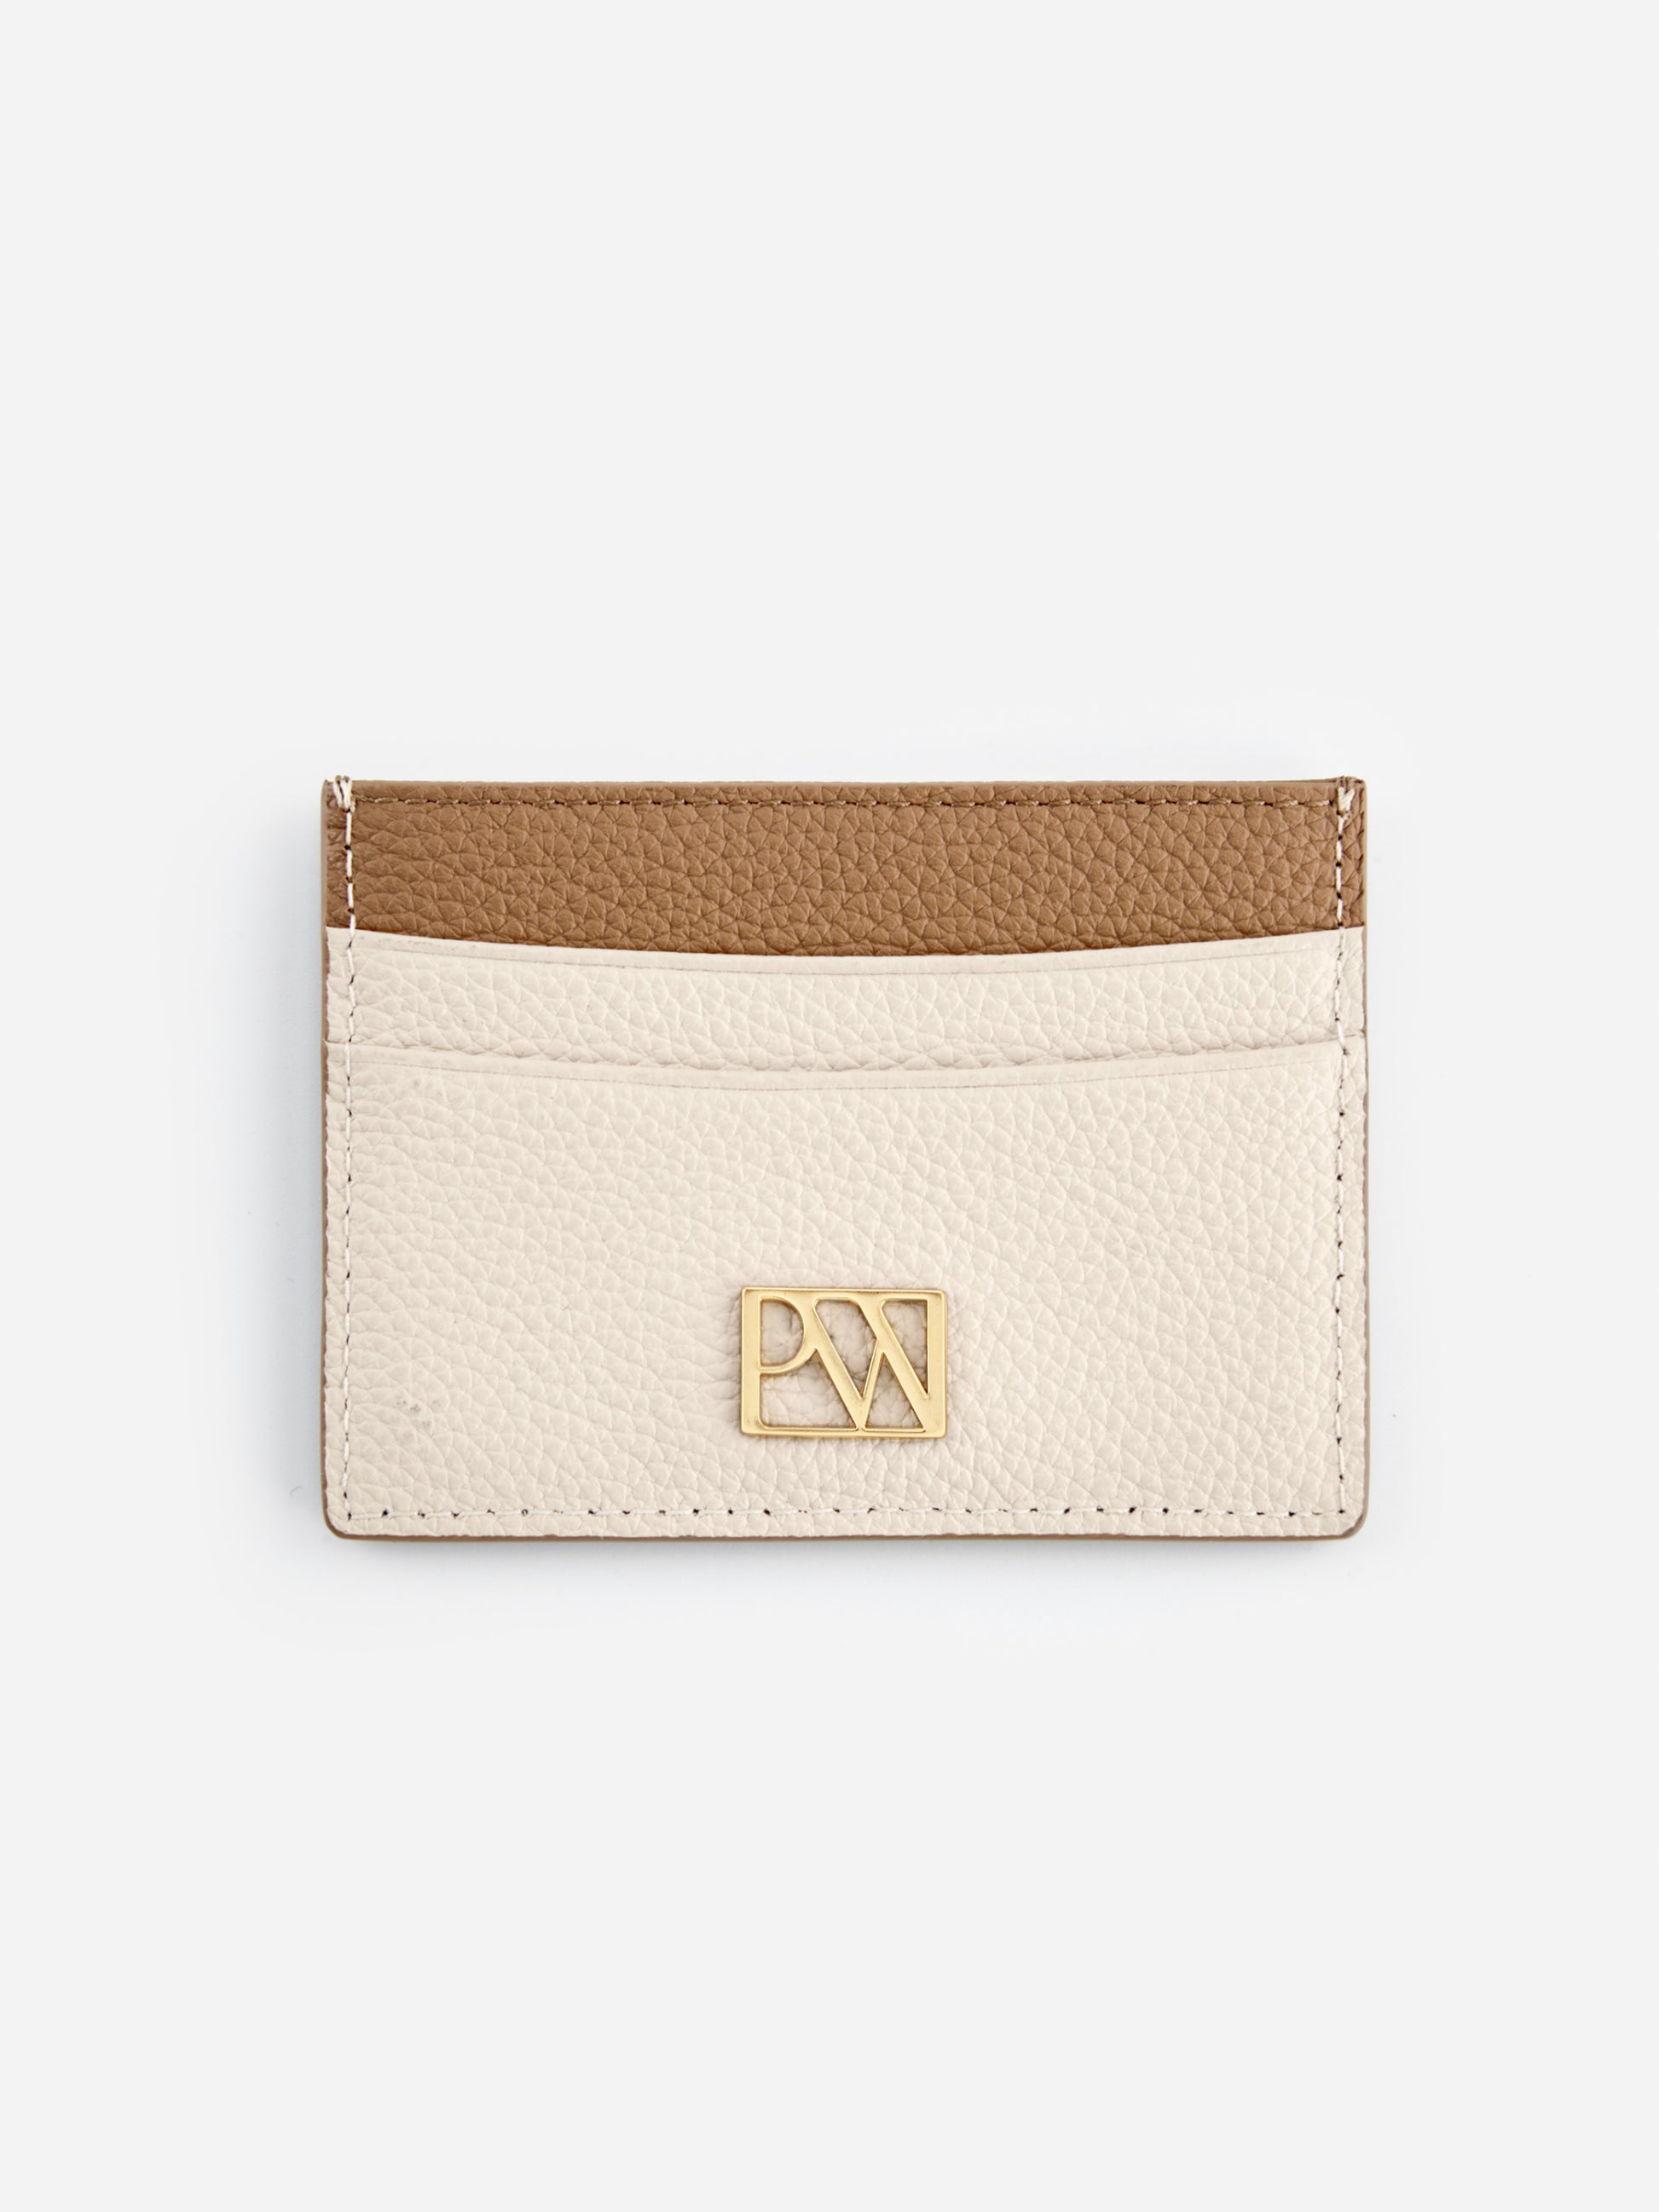 PW Card Holder in Cream Cappuccino | Parisa Wang | Featured